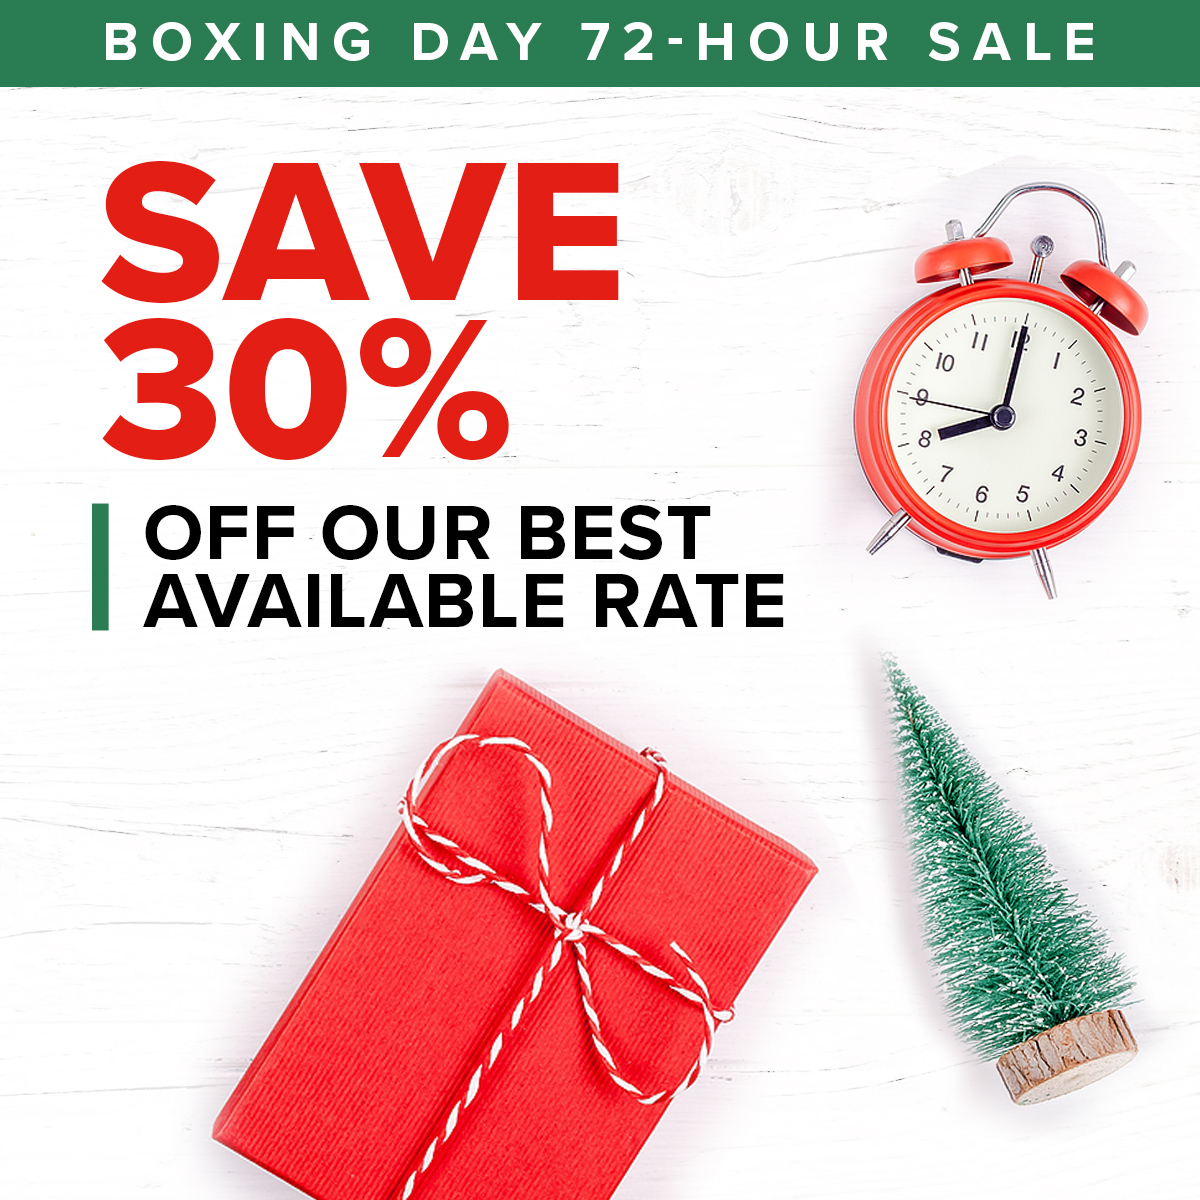 🌟 Only 24 Hours Left! ⏳ Up to 30% OFF Ends Soon! ⚡ Don't miss out on our exclusive Boxing Day Guestroom Offer! Act fast to secure your savings before time runs out! BOOK NOW: reservations.travelclick.com/13193?RatePlan…